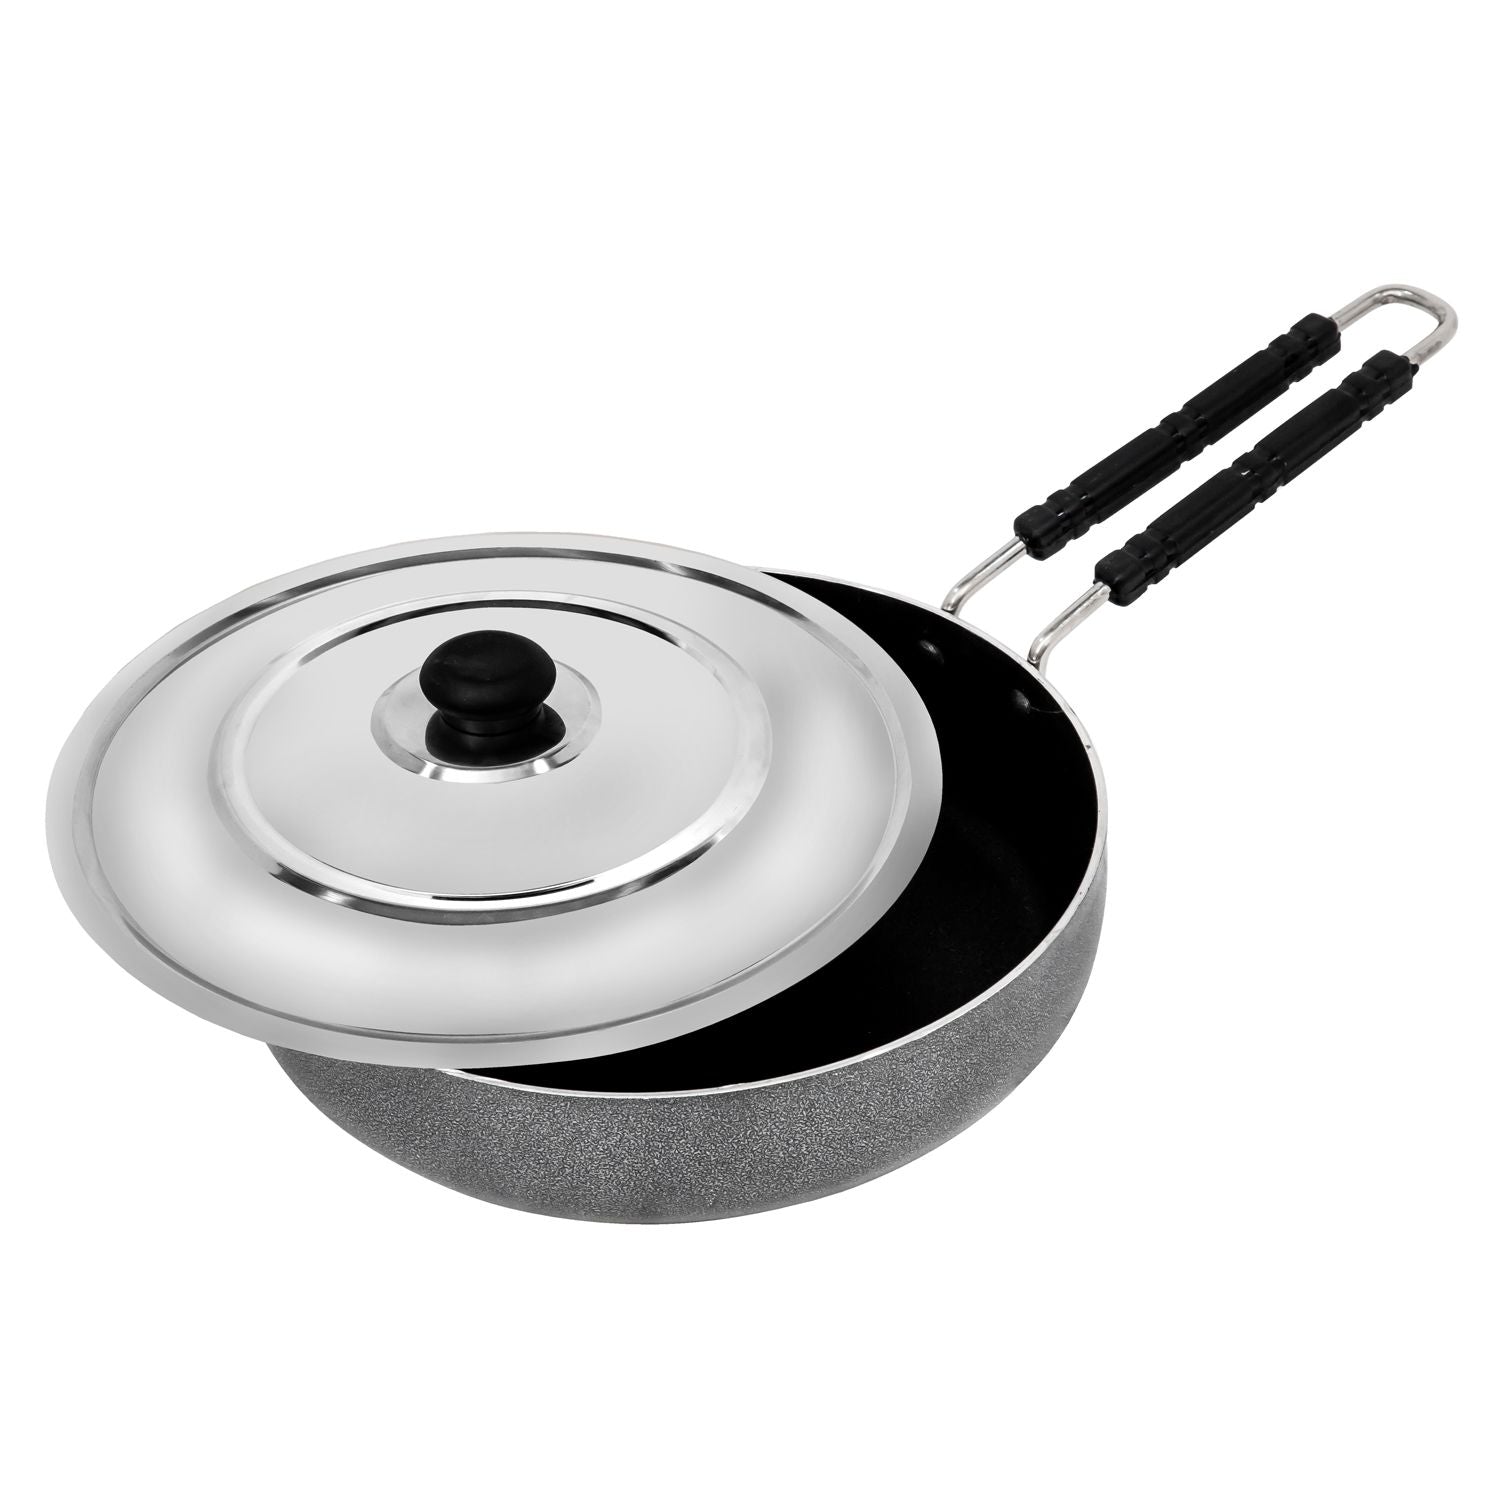 Rasoi Non-Stick Aluminum Hammer Tone Finish Fry Pan with SS Lid (4 MM)